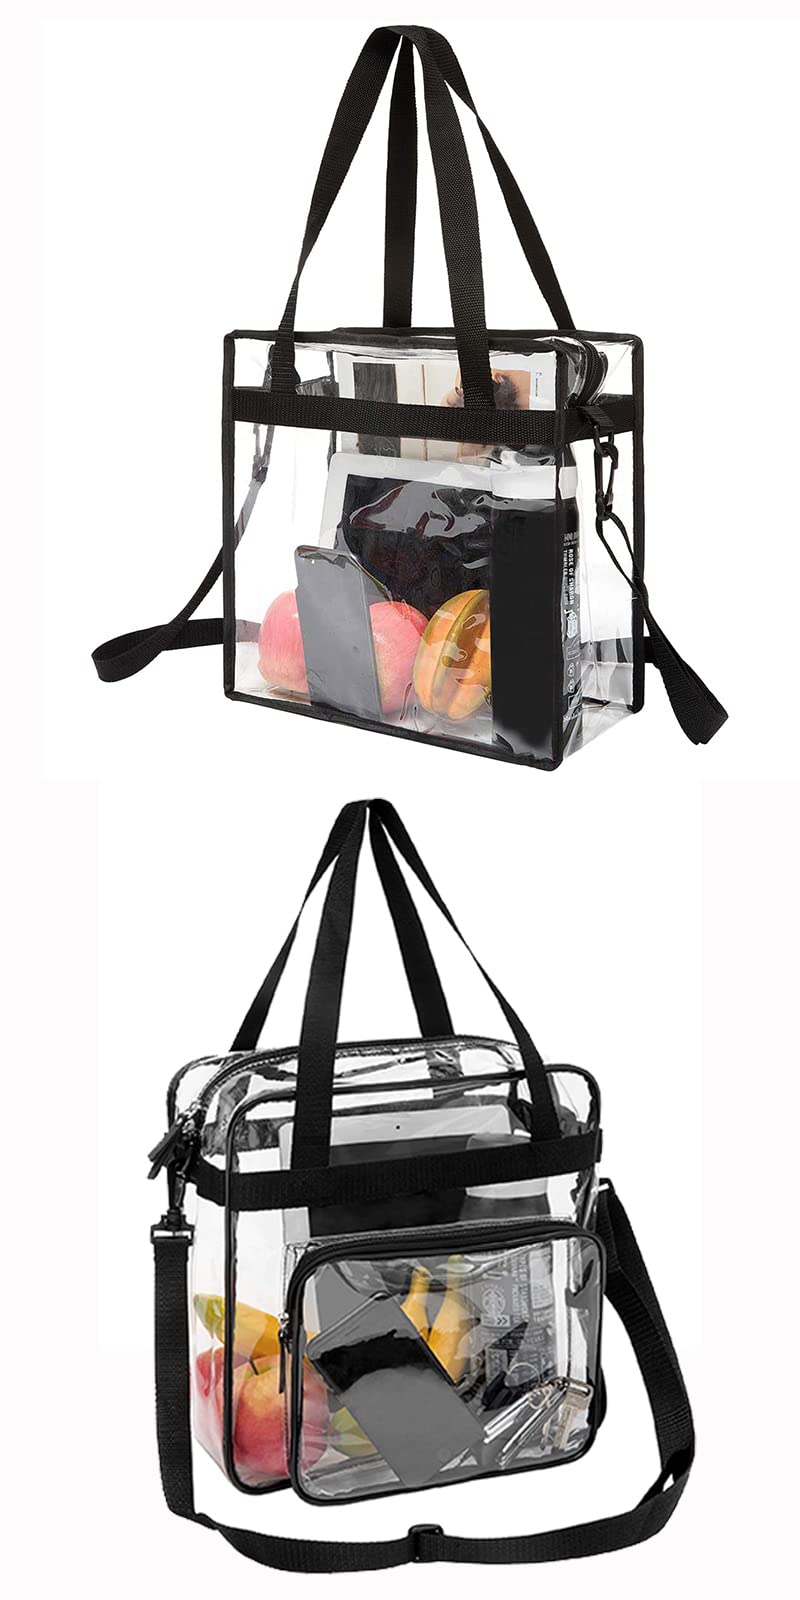 Clear Stadium Approved Clear Tote Bag Product Details